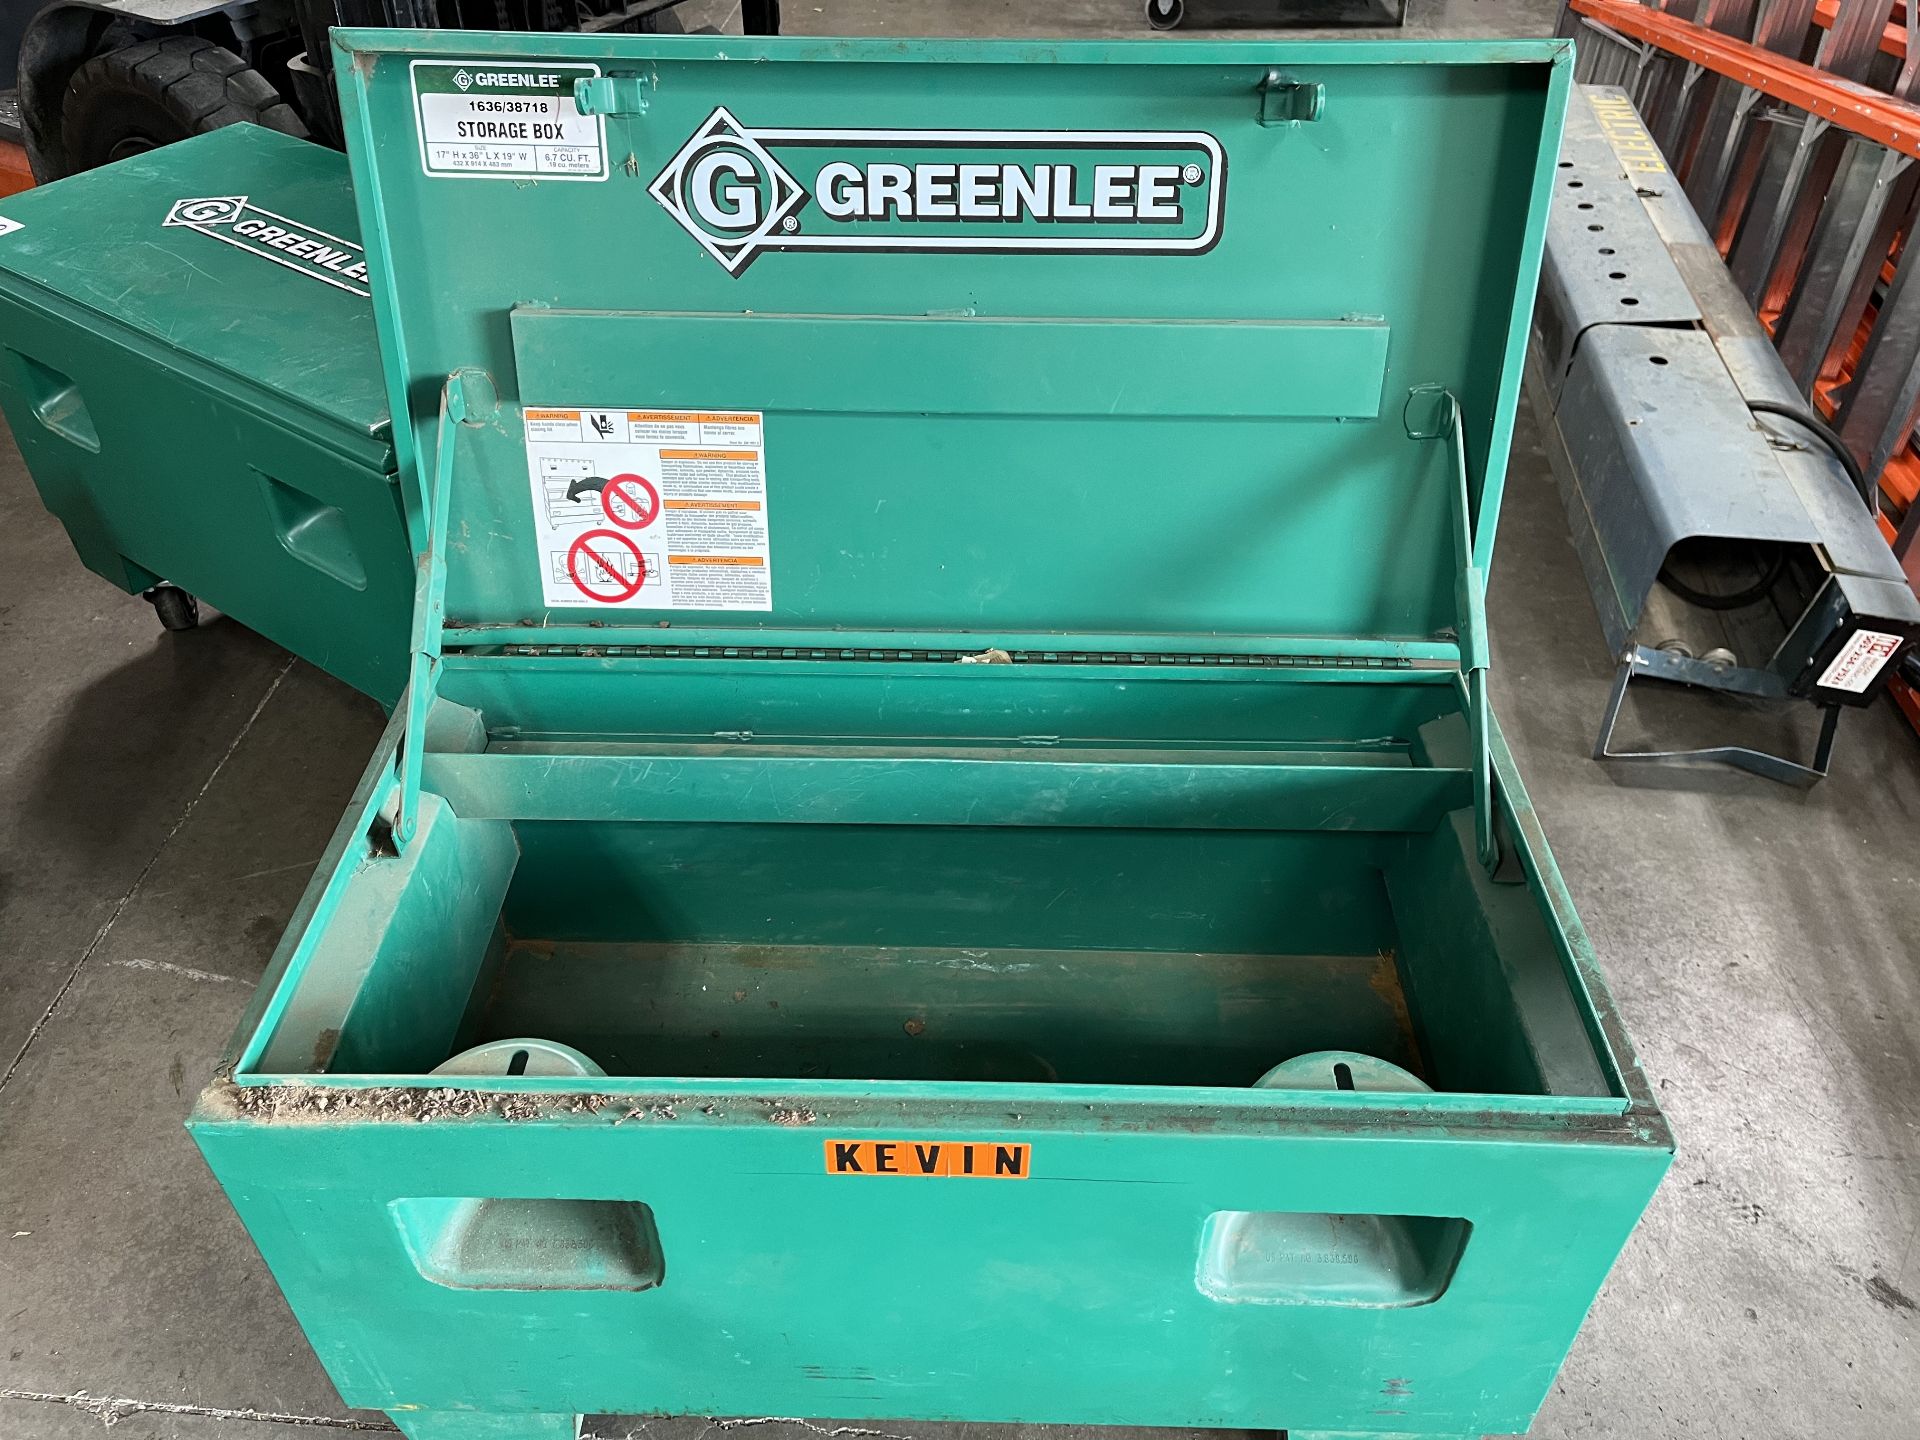 Greenlee 17" X 36" X 19" Job Box on casters Model 1636/38718 - Image 2 of 2